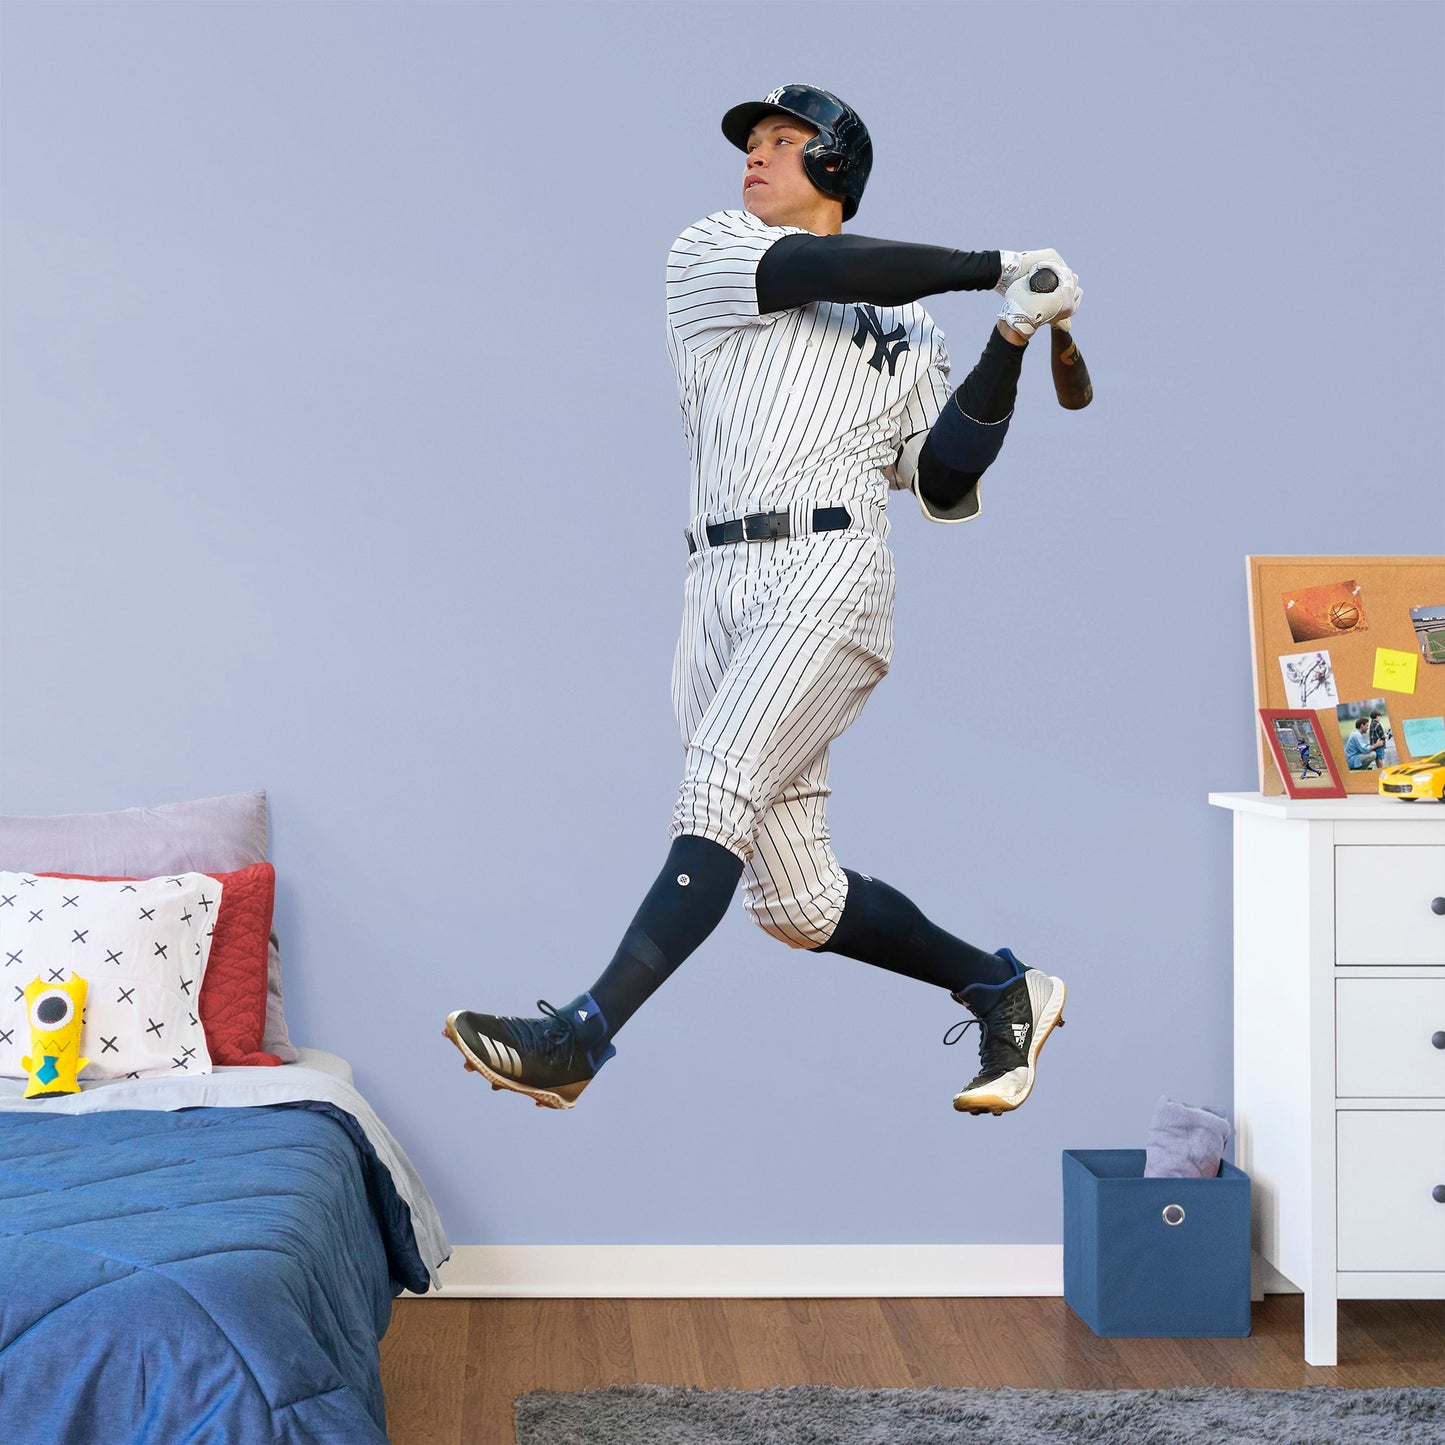 Life-Size Athlete + 12 Decals (49"W x 78"H) Hit a home run with Bleacher Creatures and other fans of the Yankees’ navy and white pinstripes with this officially licensed MBL wall decal featuring outfielder Aaron Judge. Easy to apply and remove, this high-quality decal displays the full frame of the former Fresno State Bulldog and the American League’s 2017 Rookie of the Year.